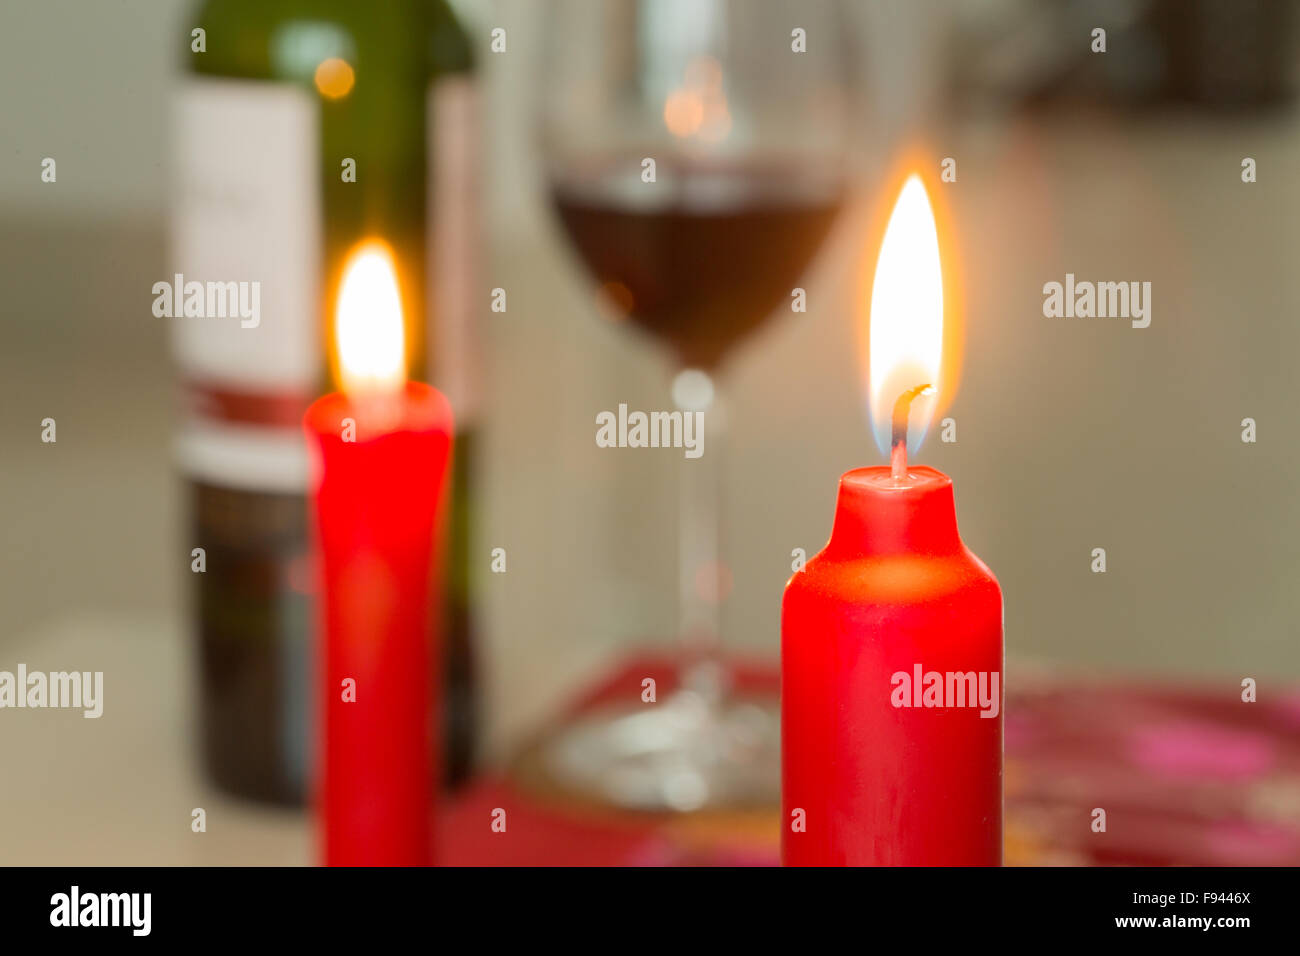 Red candle and a bottle of wine with a glass in the background Stock Photo